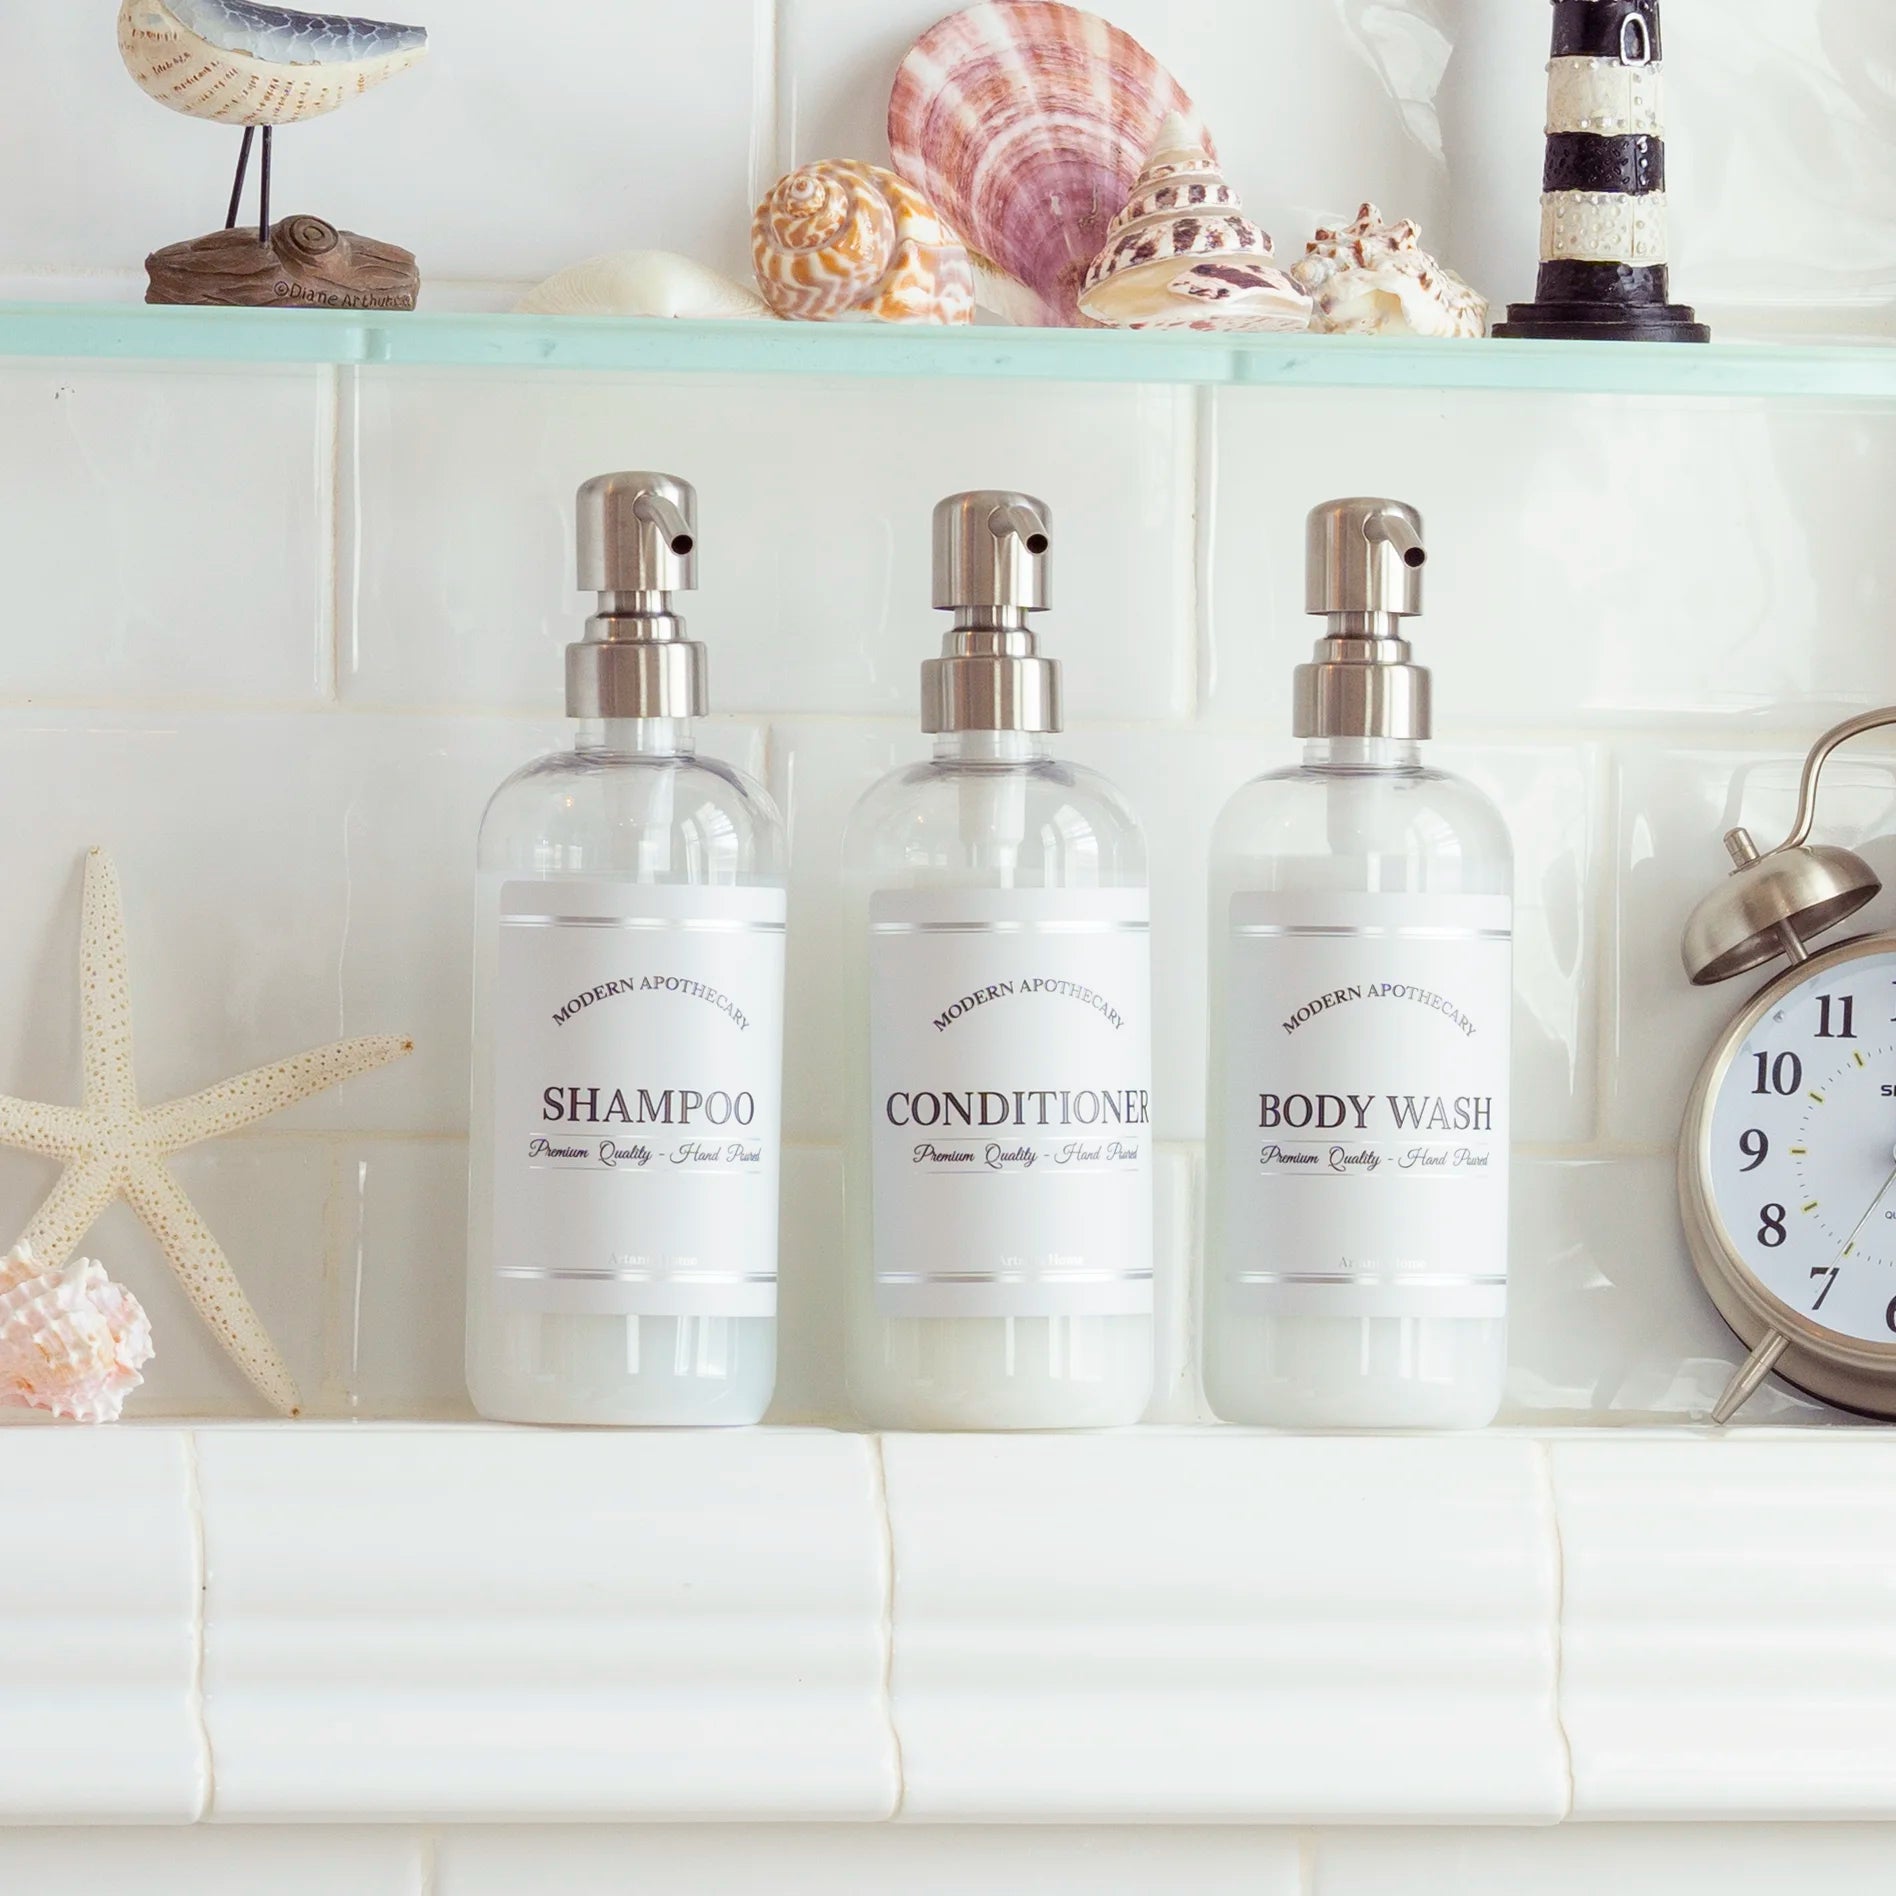 Beautiful set of three soap dispensers for showers in a bathroom niche with coordinated labels reading "Shampoo", "Conditioner", and "Body Wash"